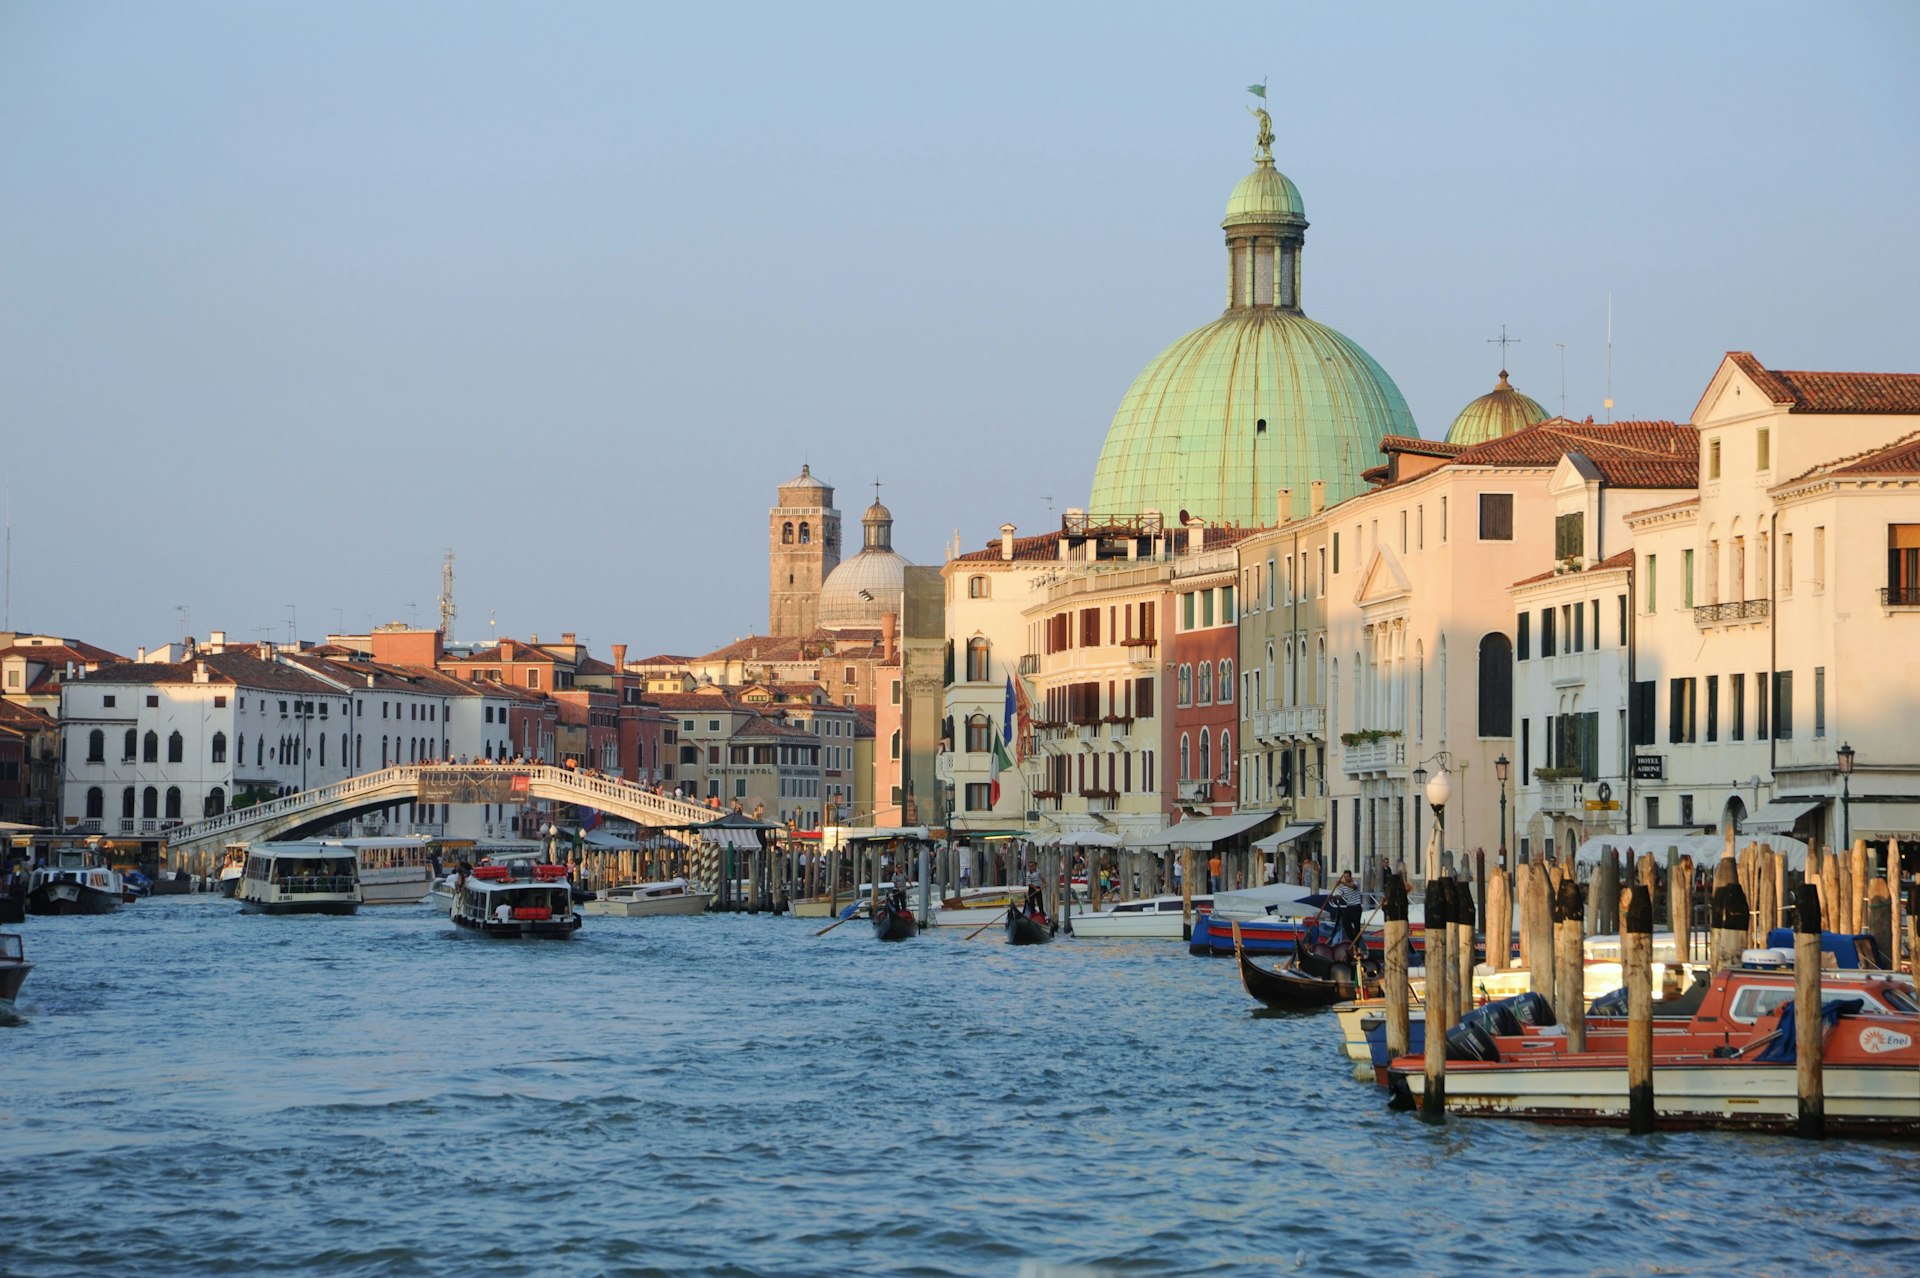 Views of the Grand Canal don't cost a cent. Image by Manfred Segerer/Ullstein Bild/ Getty Images